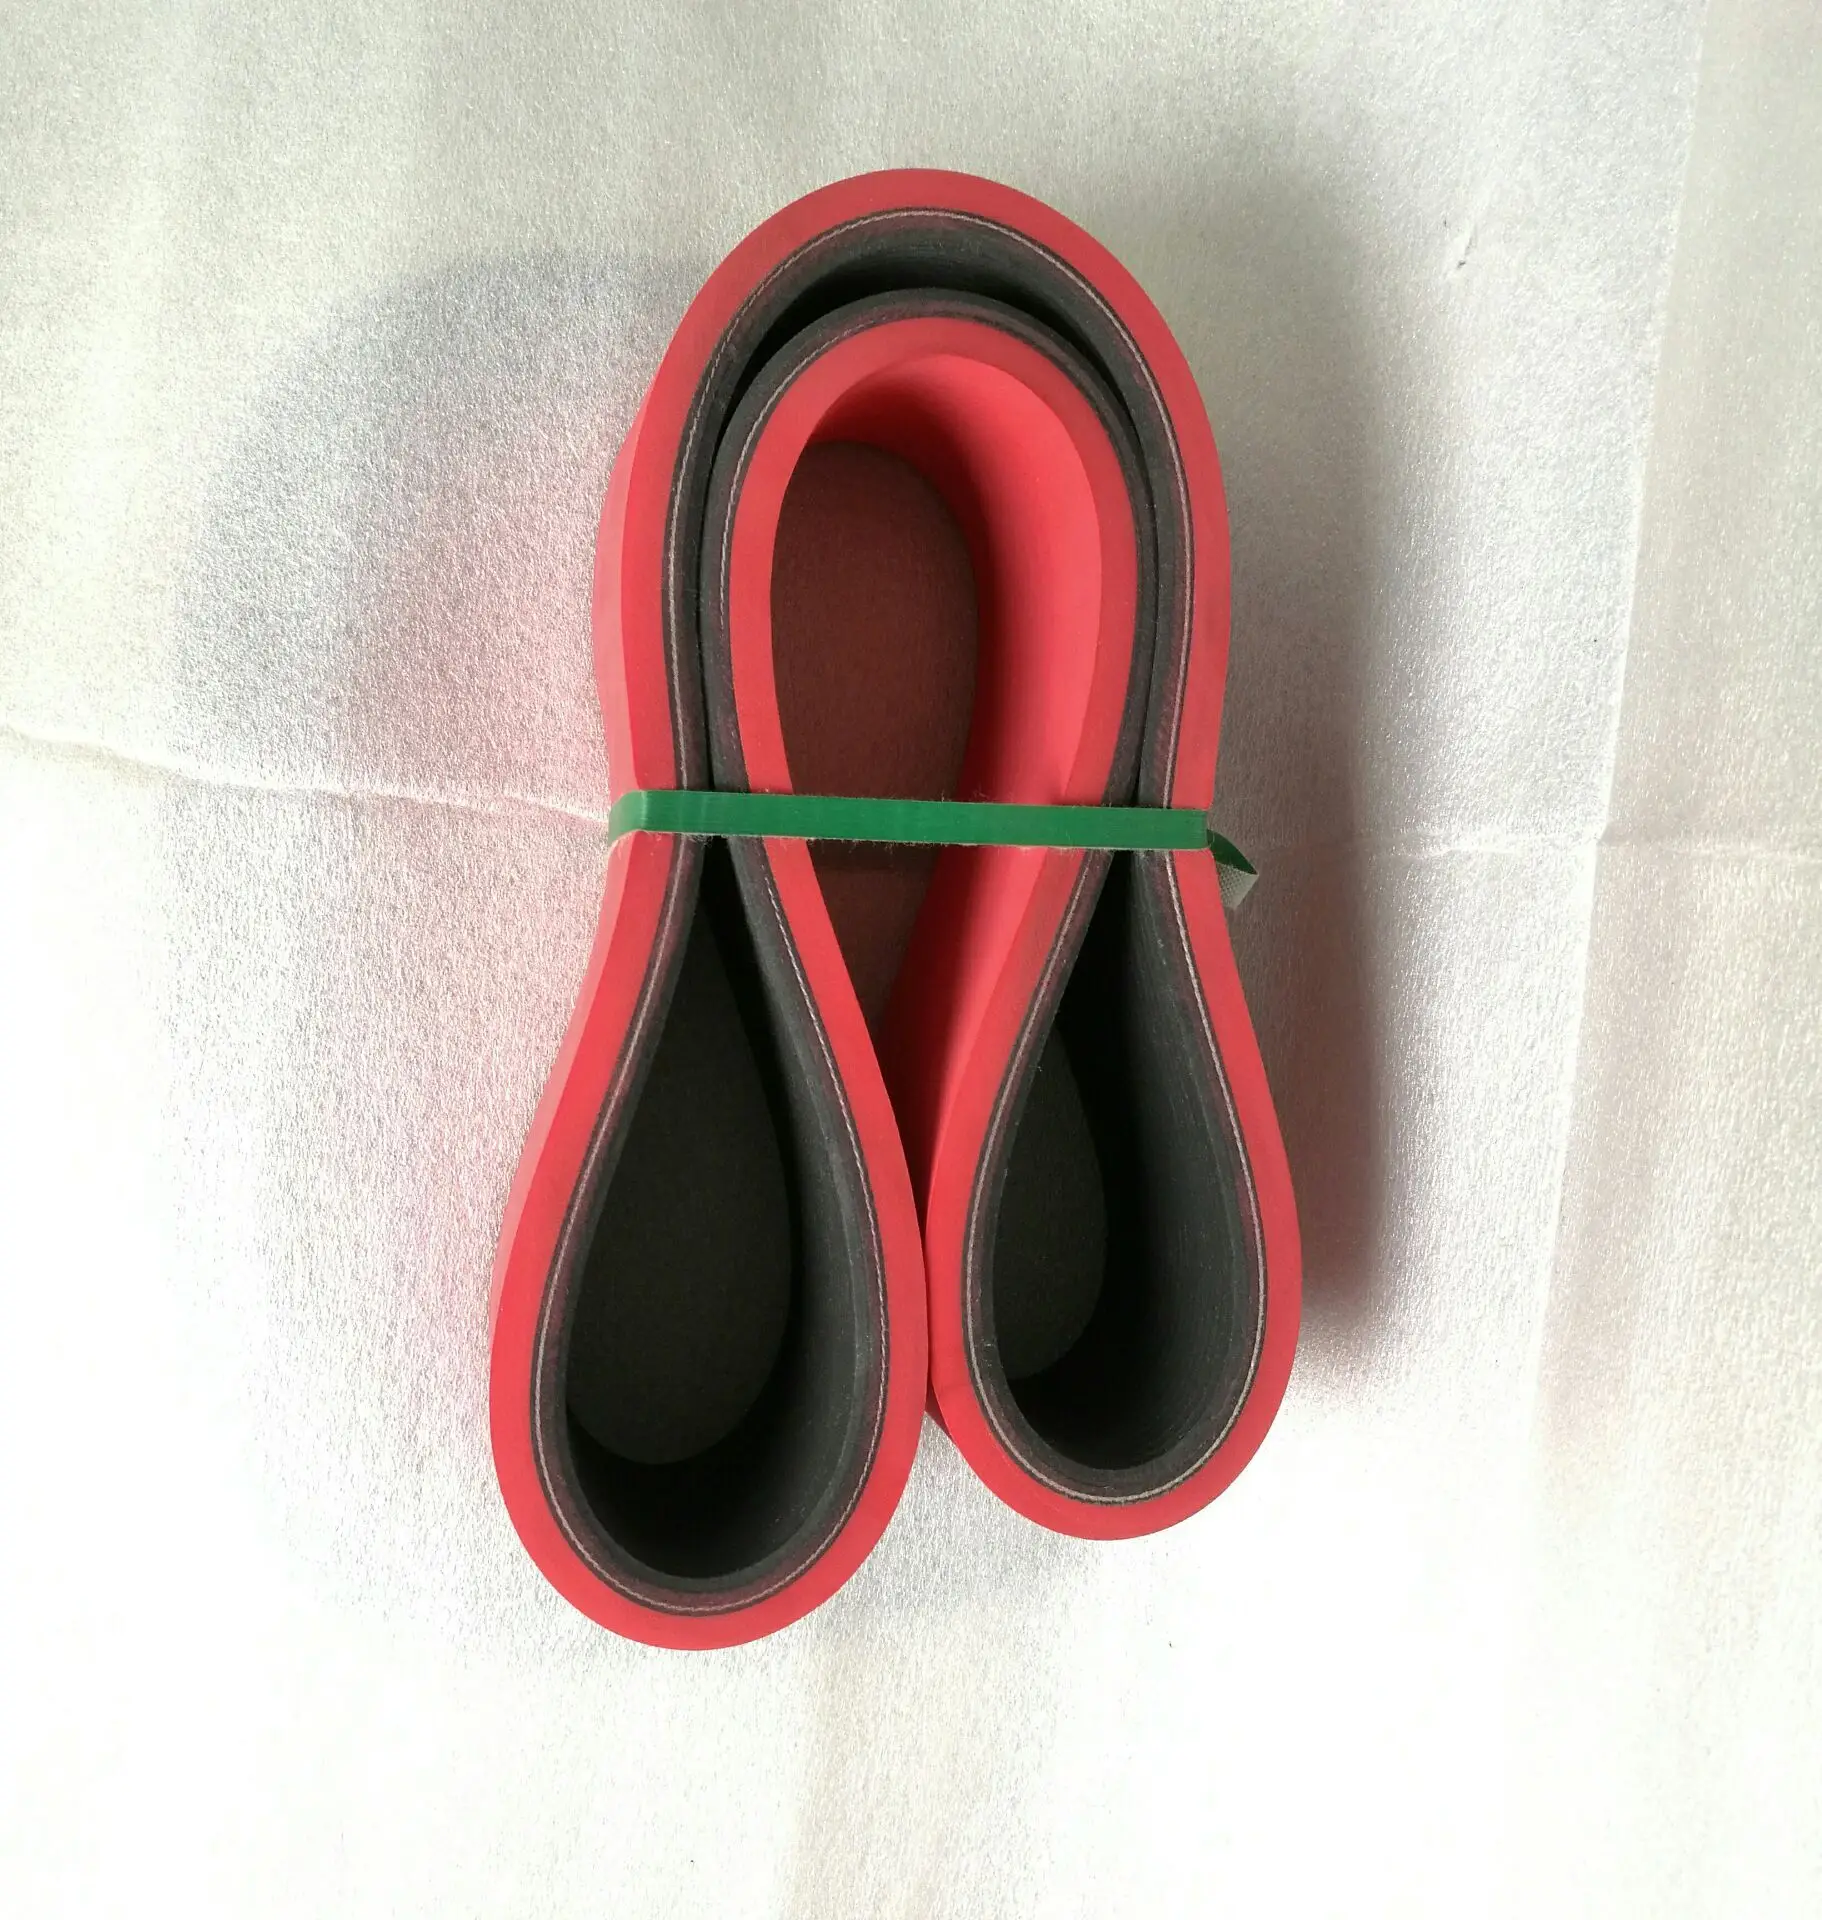 Multi Ribbed Belts Coated With Red Rubber Section Pl 100 1460 Buy マルチリブ付きベルト 赤ゴム マルチリブ付きベルトでコーティング赤いゴム セクションpl 100 1460 Product On Alibaba Com